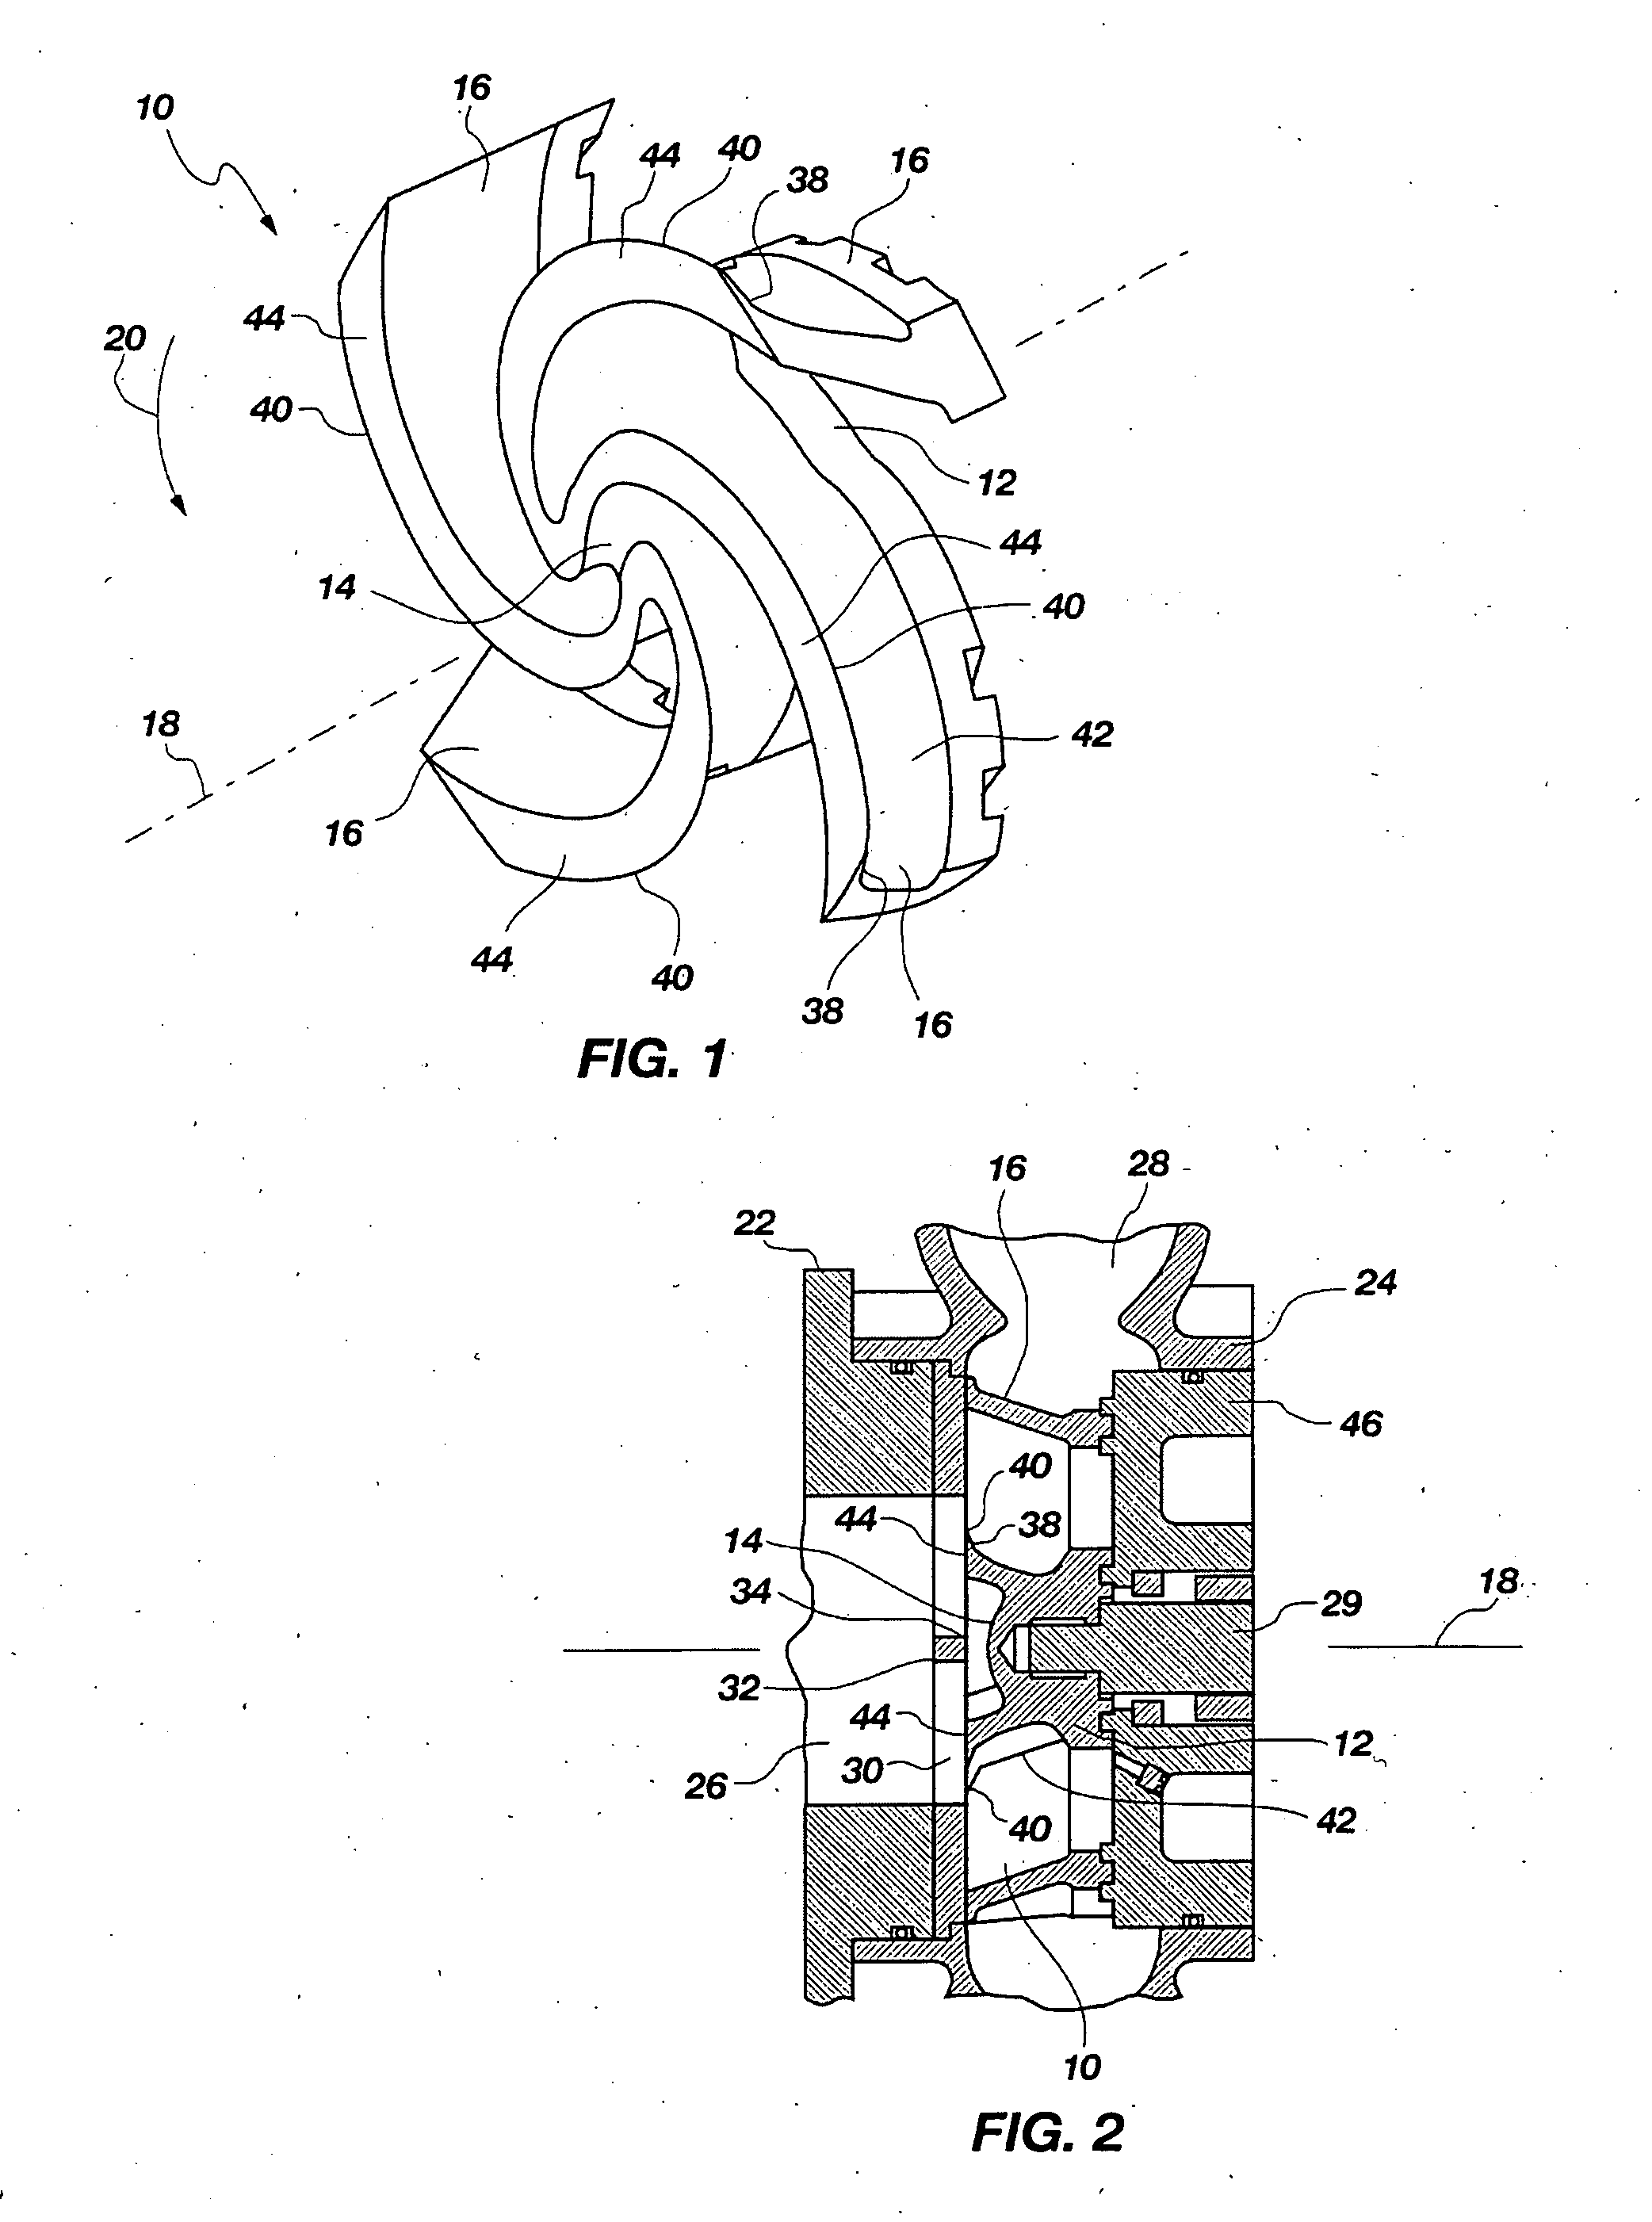 Impeller vane configuration for a centrifugal pump